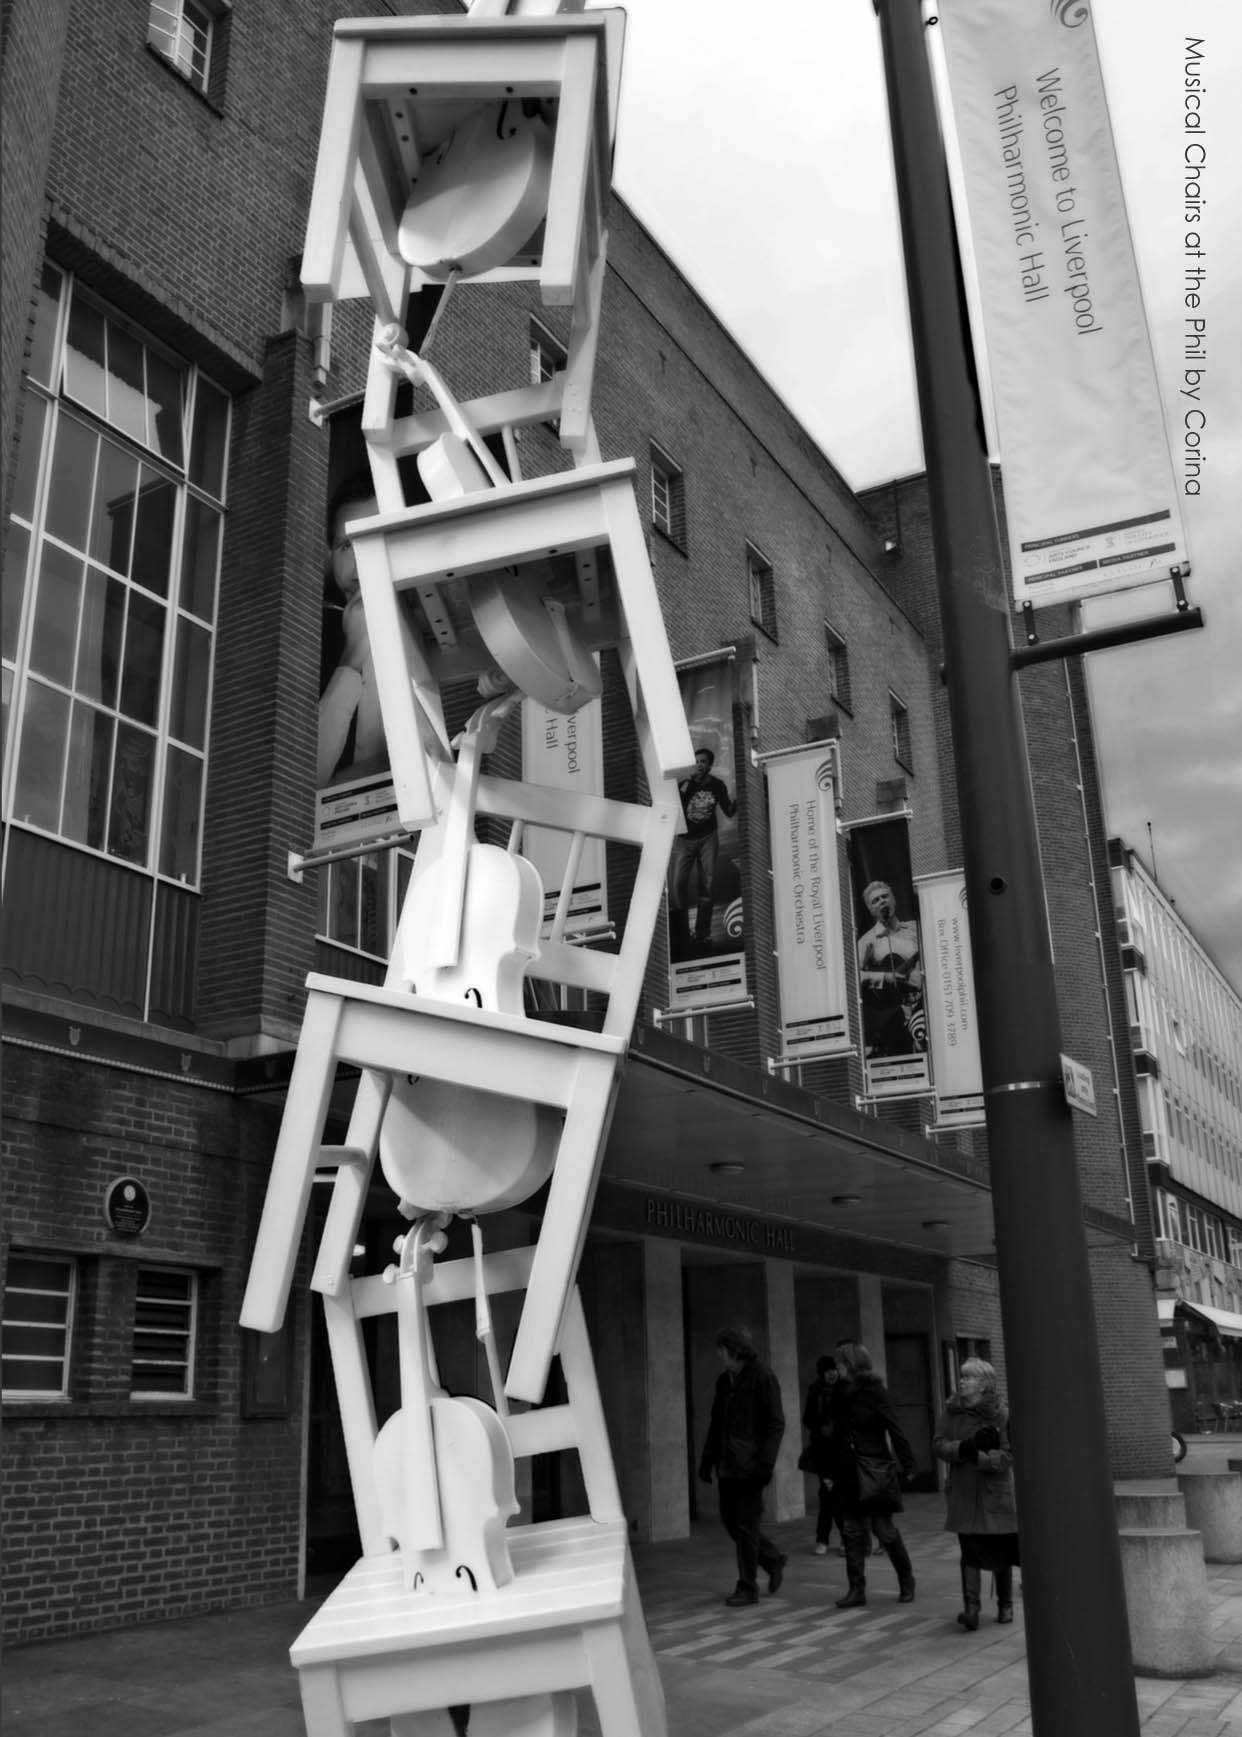 Musical Chairs (photoshopped) Outside The Philharmonic Hall Liverpool